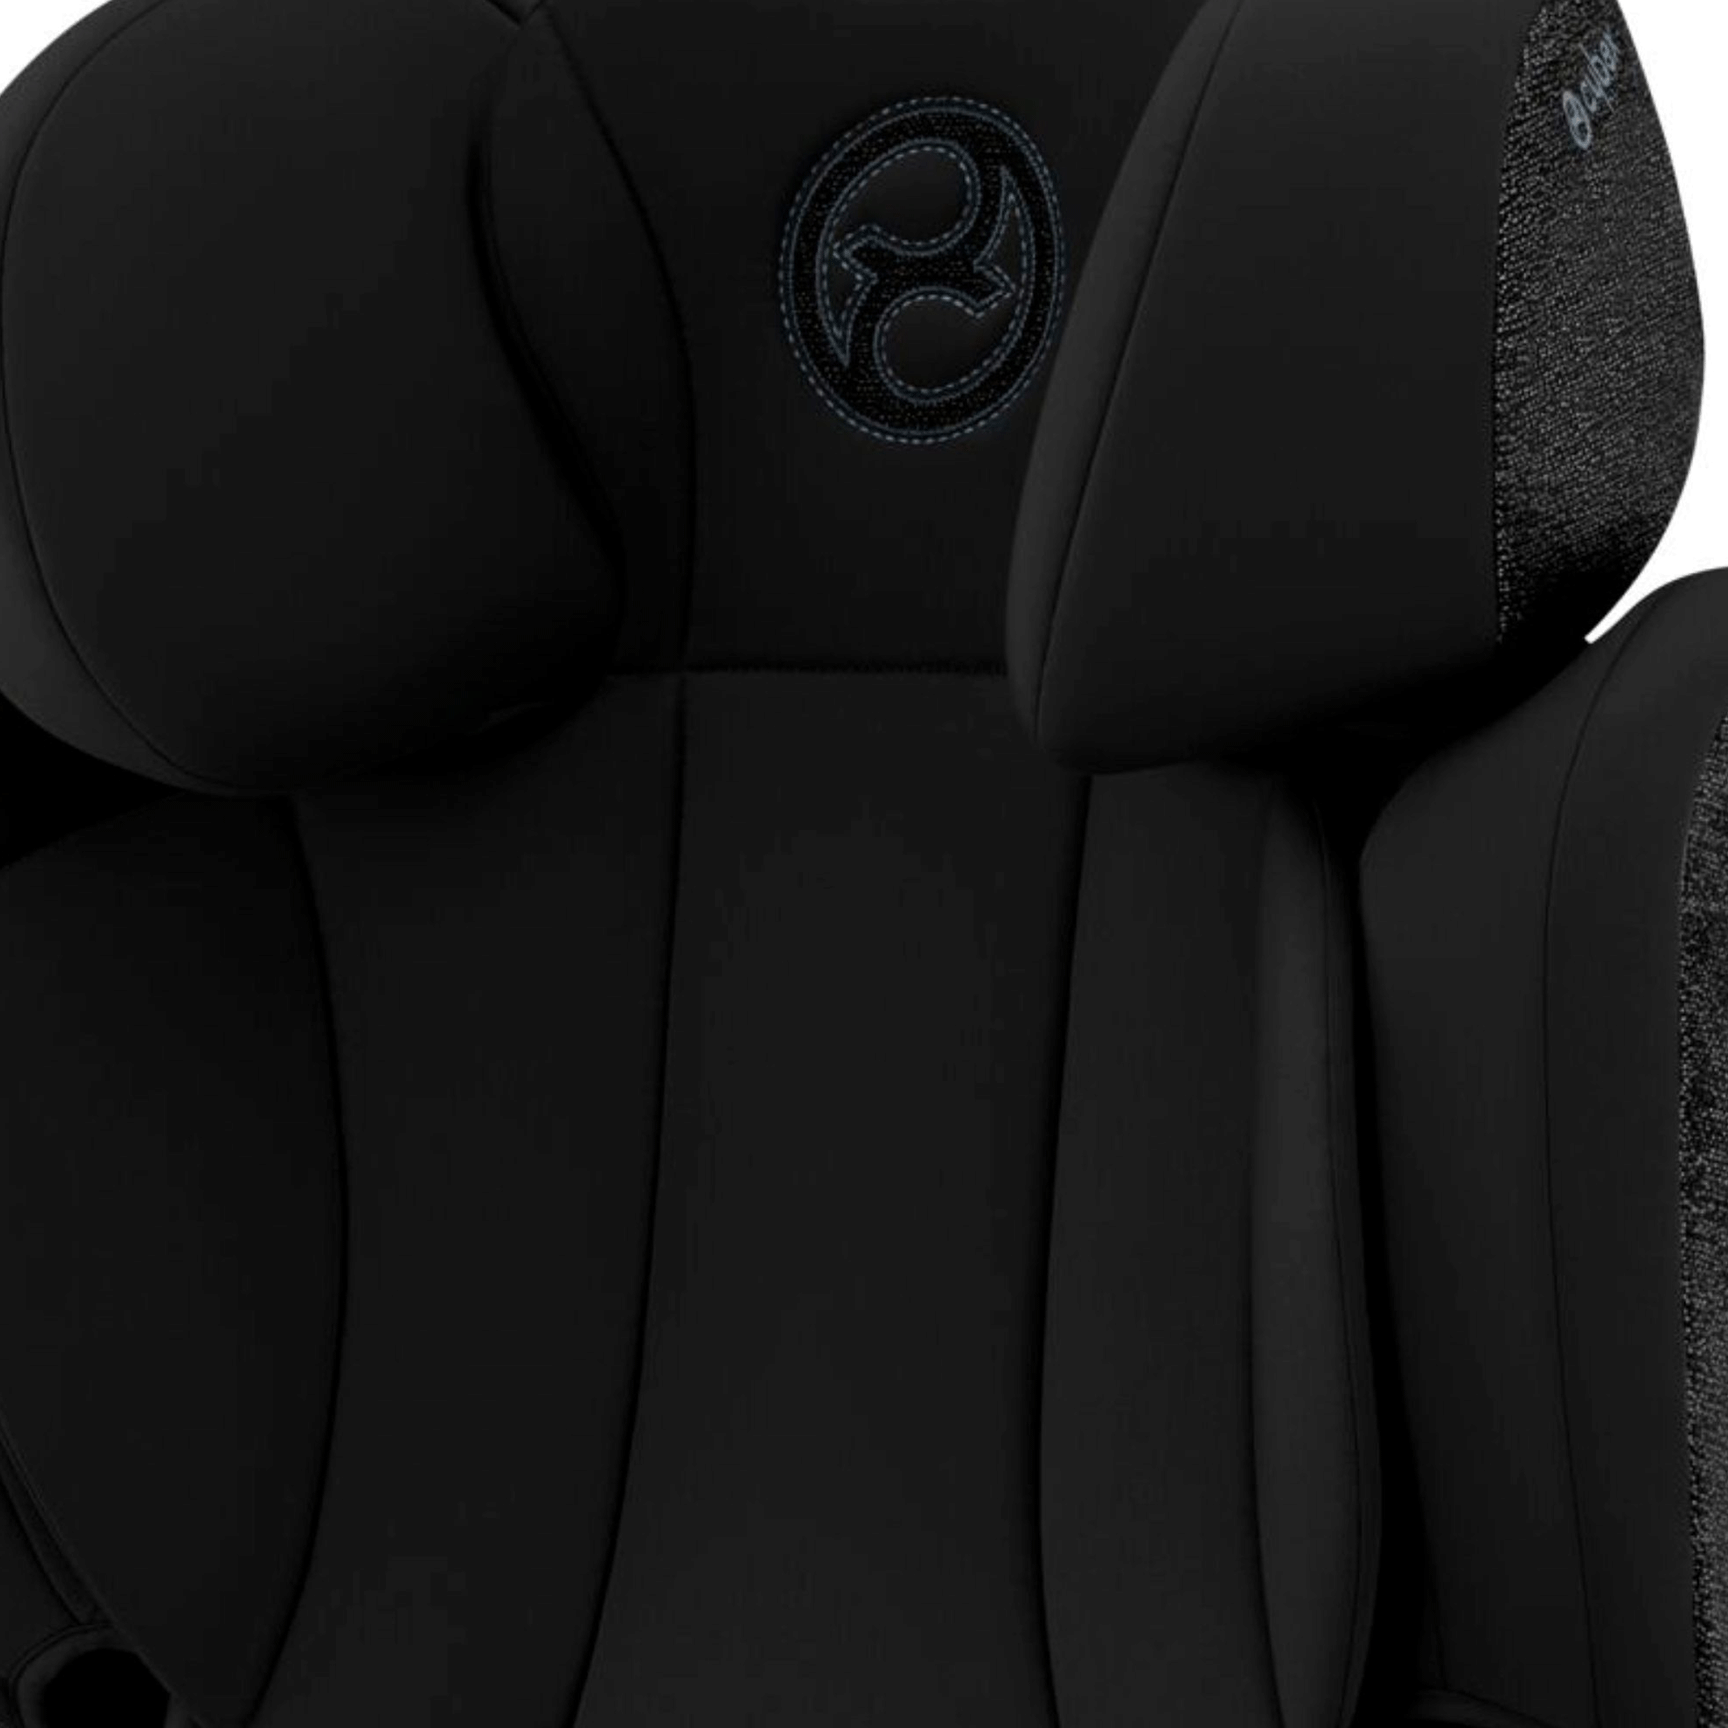 Cybex Solution T i-Fix in Sepia Black Highback Booster Seats 522004118 4063846380534